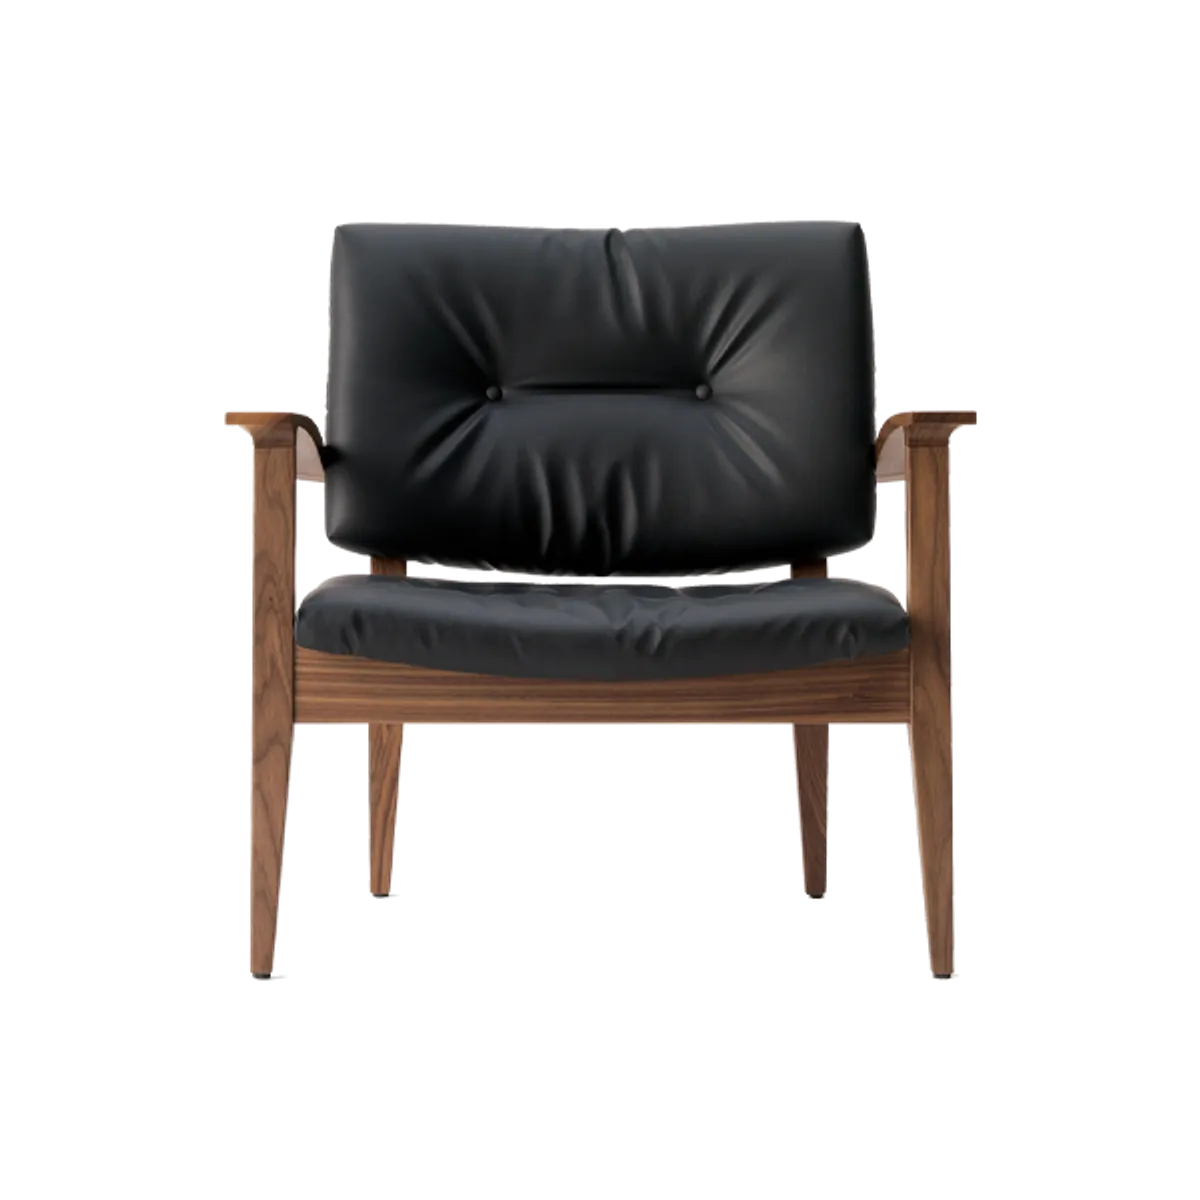 Ernestloungechair Inside Out Contracts